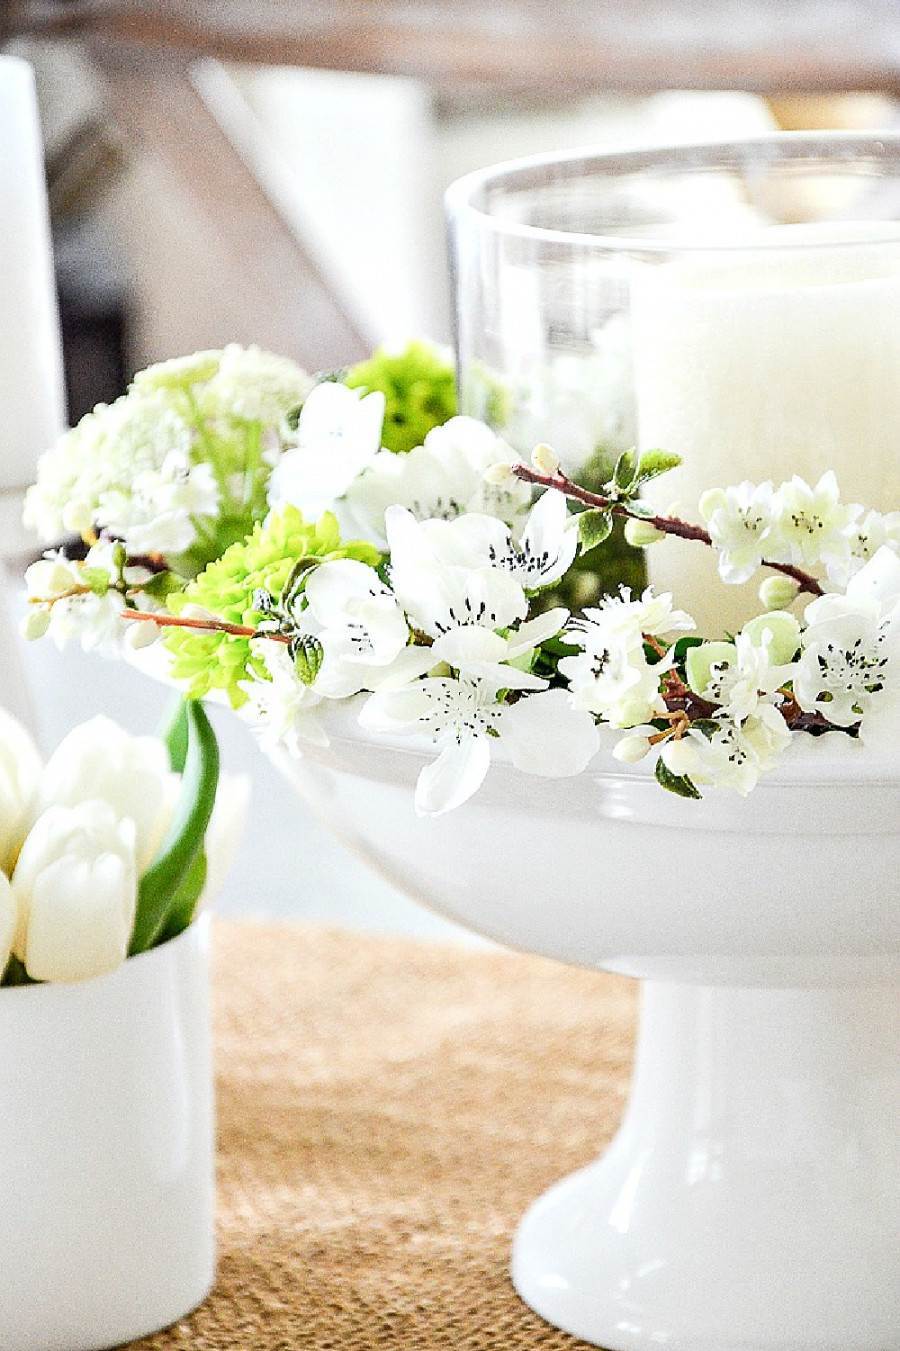 EASY AND PRETTY SPRING CENTERPIECE